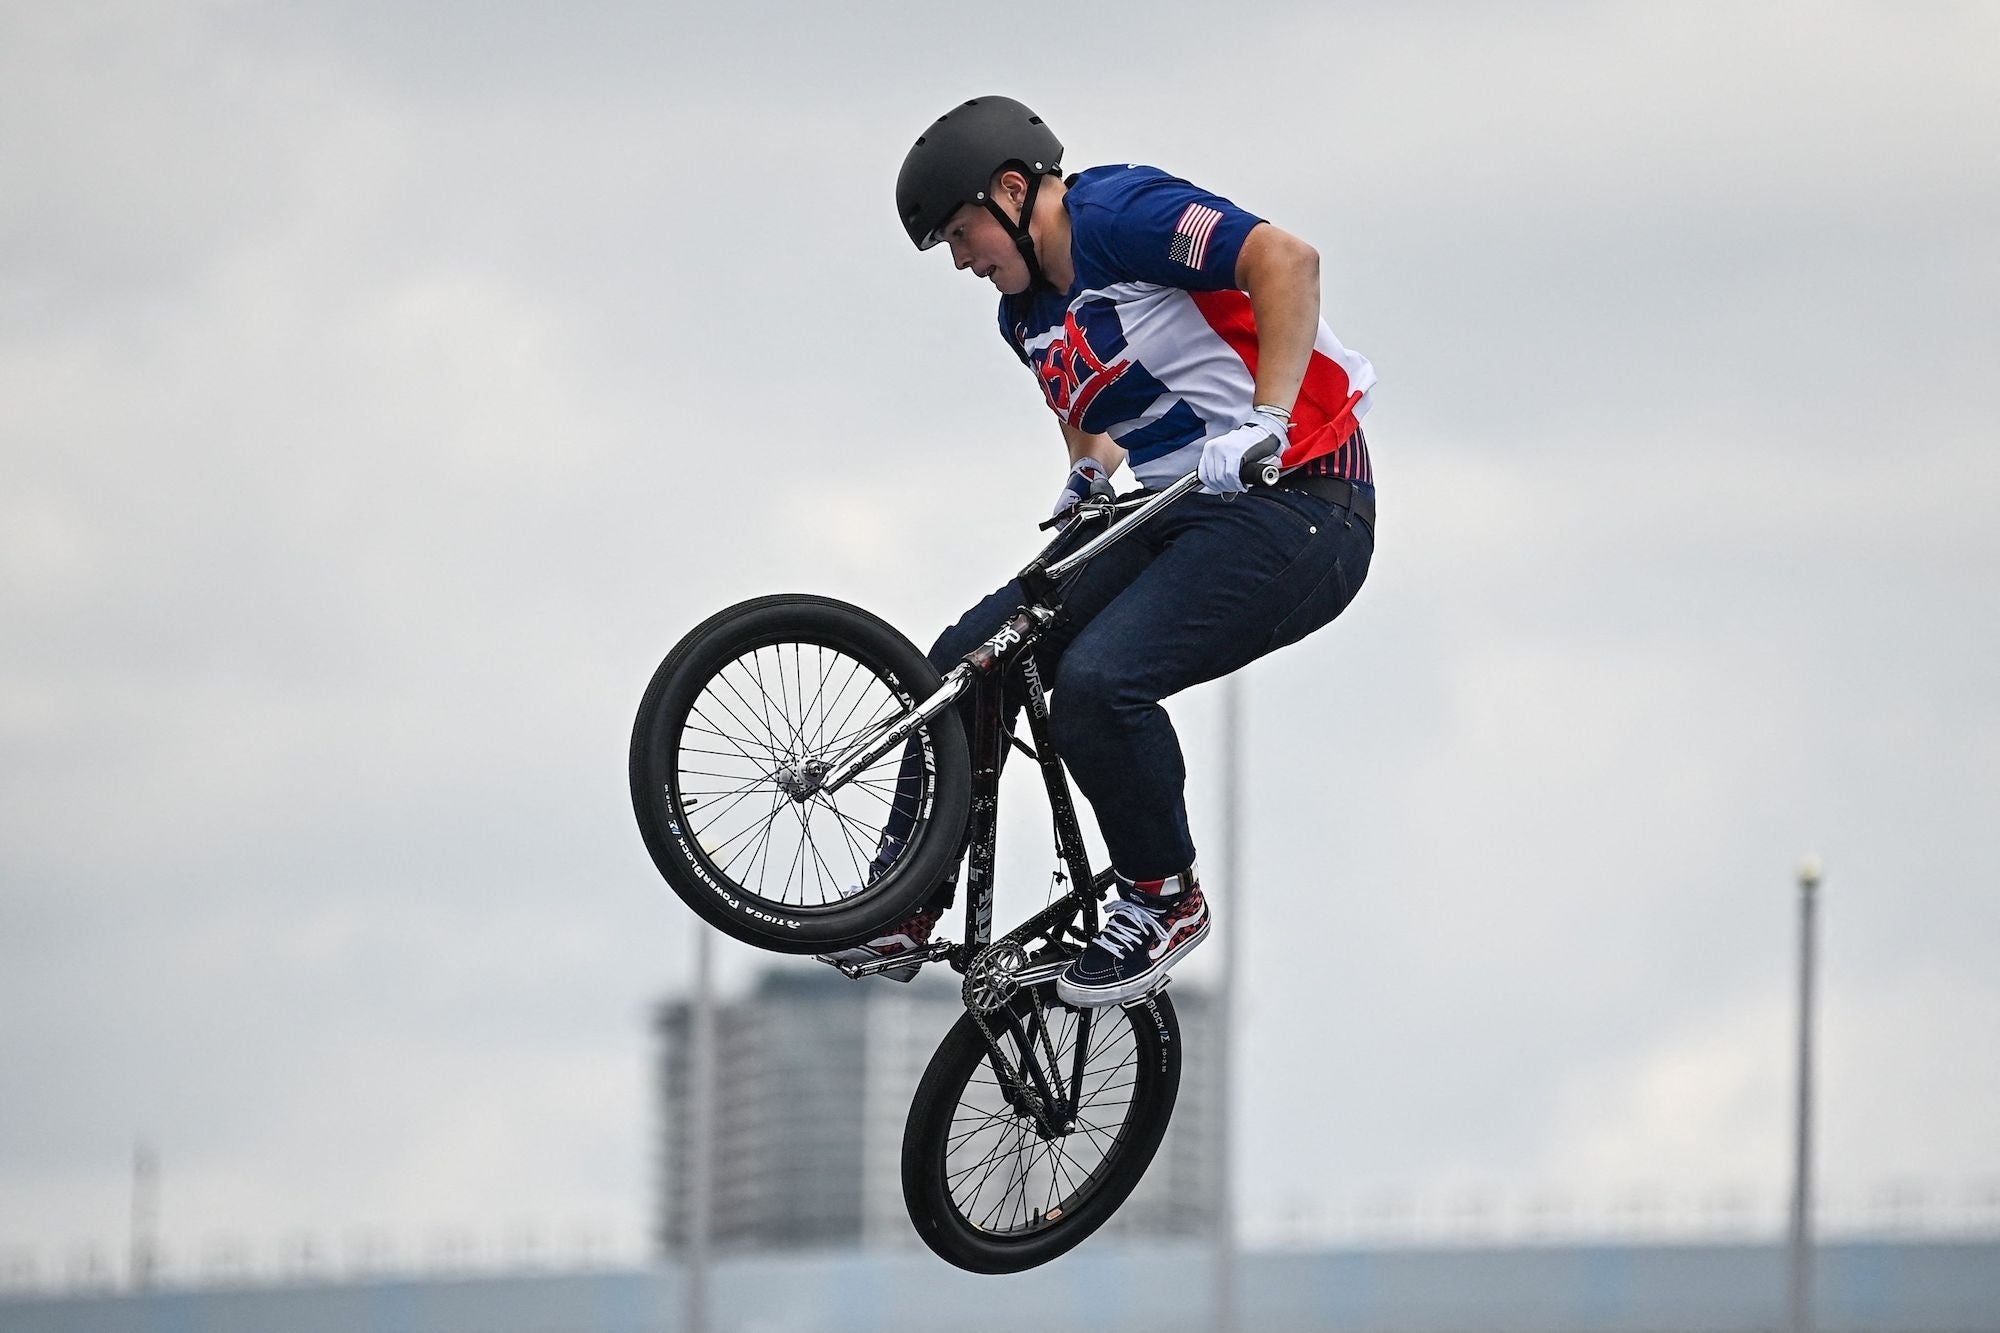 Top seeds for Olympic BMX freestyle final, Hannah Roberts Perris Benegas, Competitive action, Cycling BMX Freestyle, 2000x1340 HD Desktop